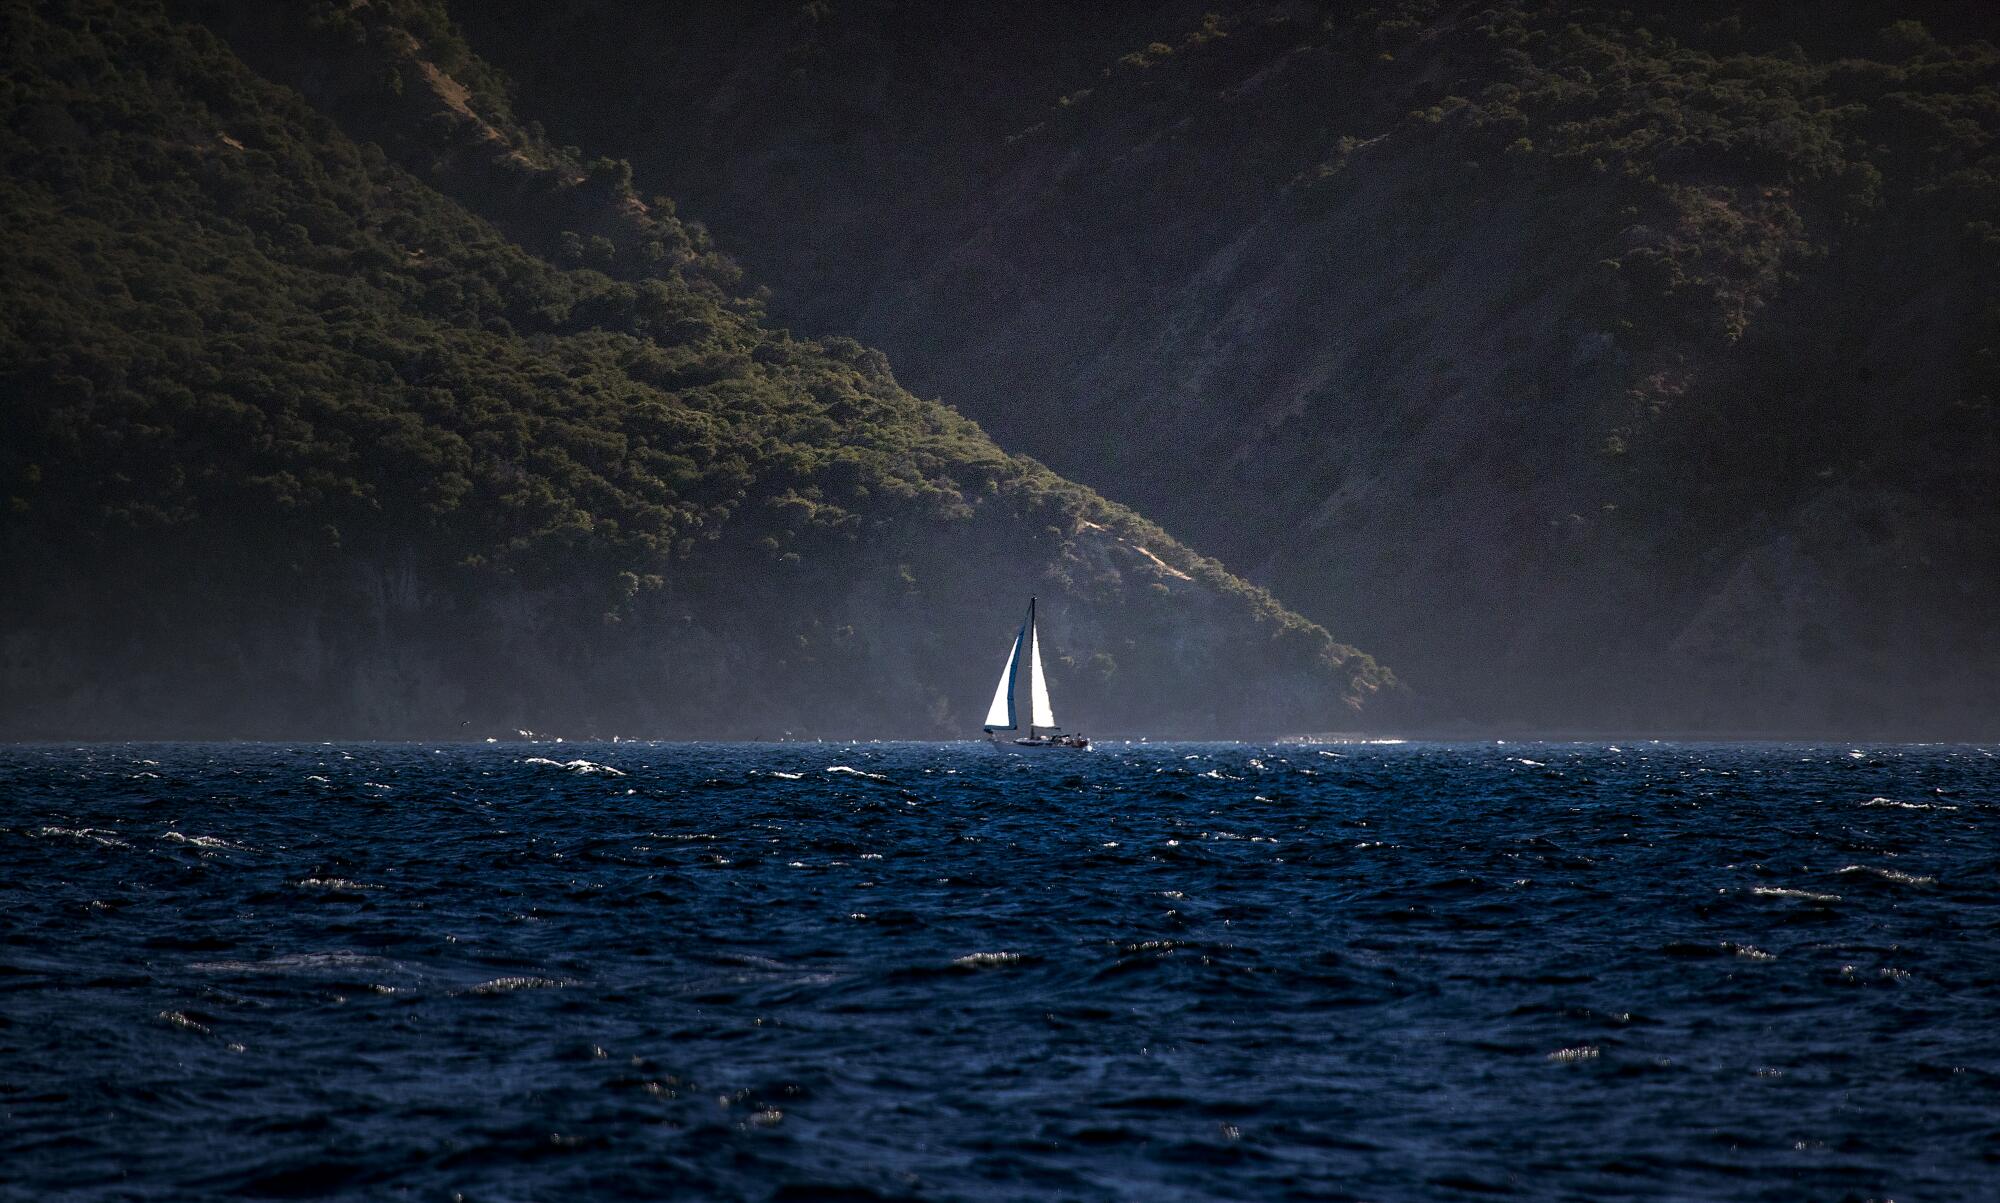 The mountains of an island rise behind a lone sailboat.